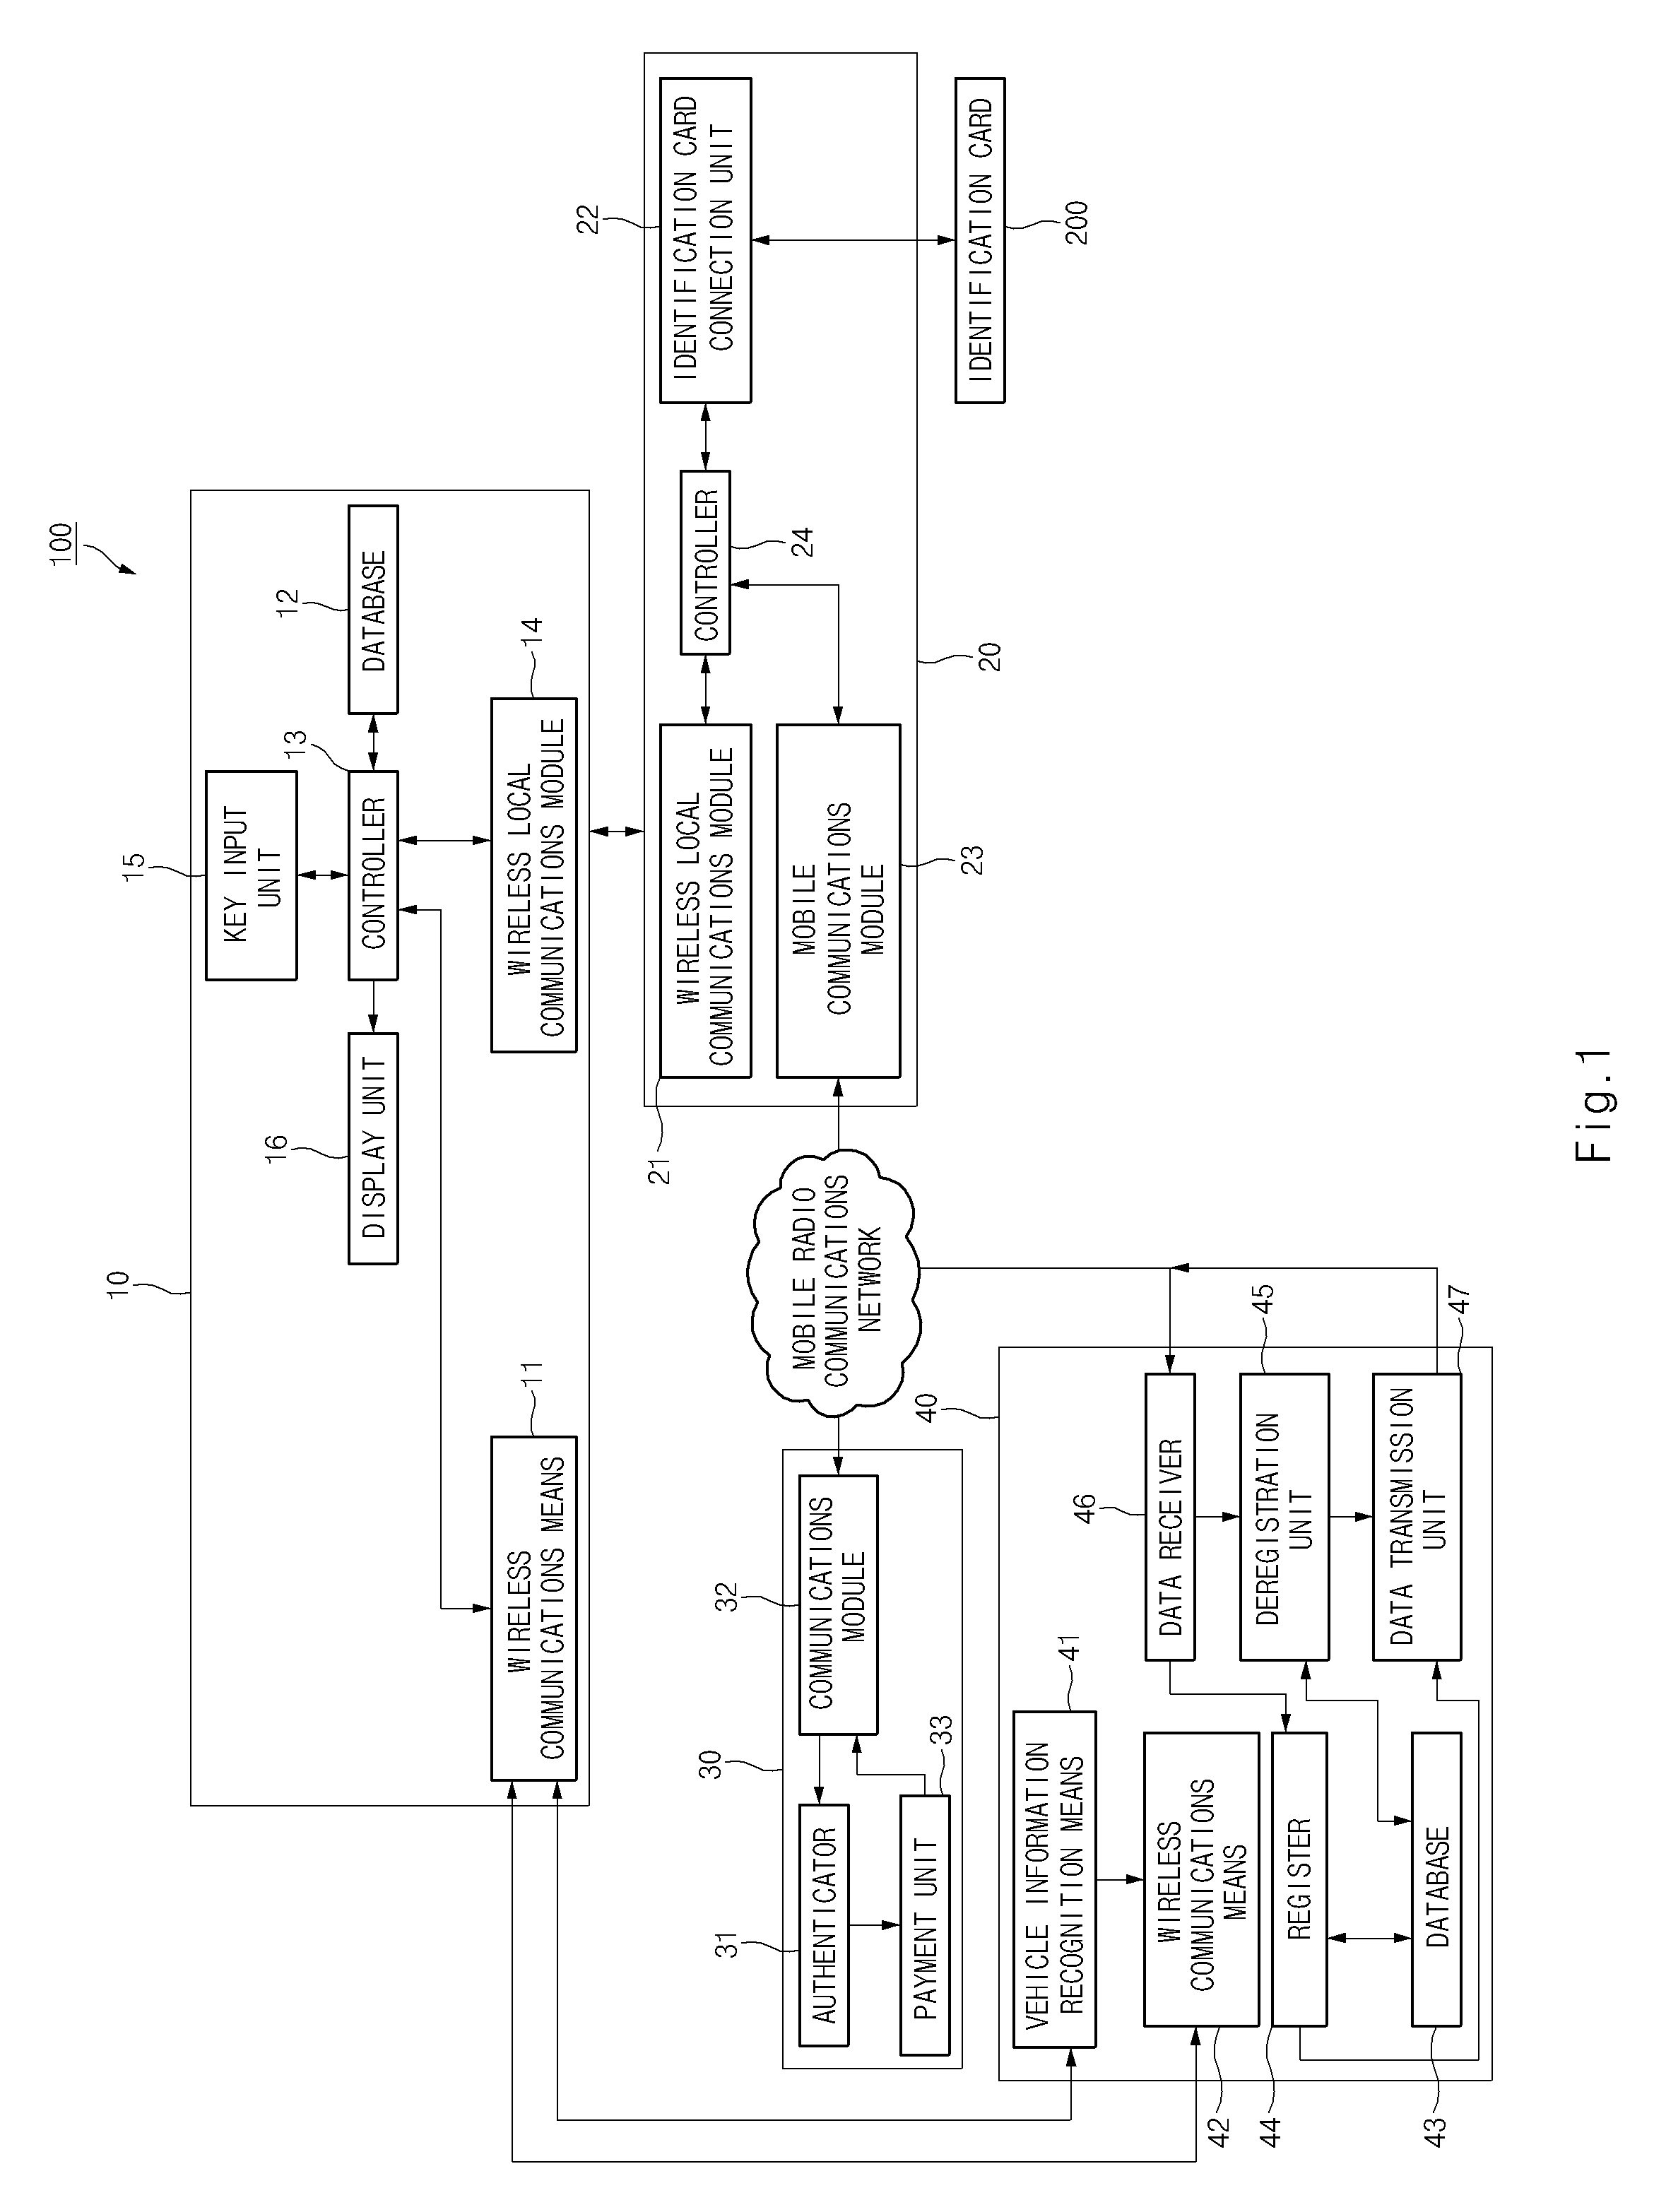 Electronic toll settlement system and apparatus for vehicle